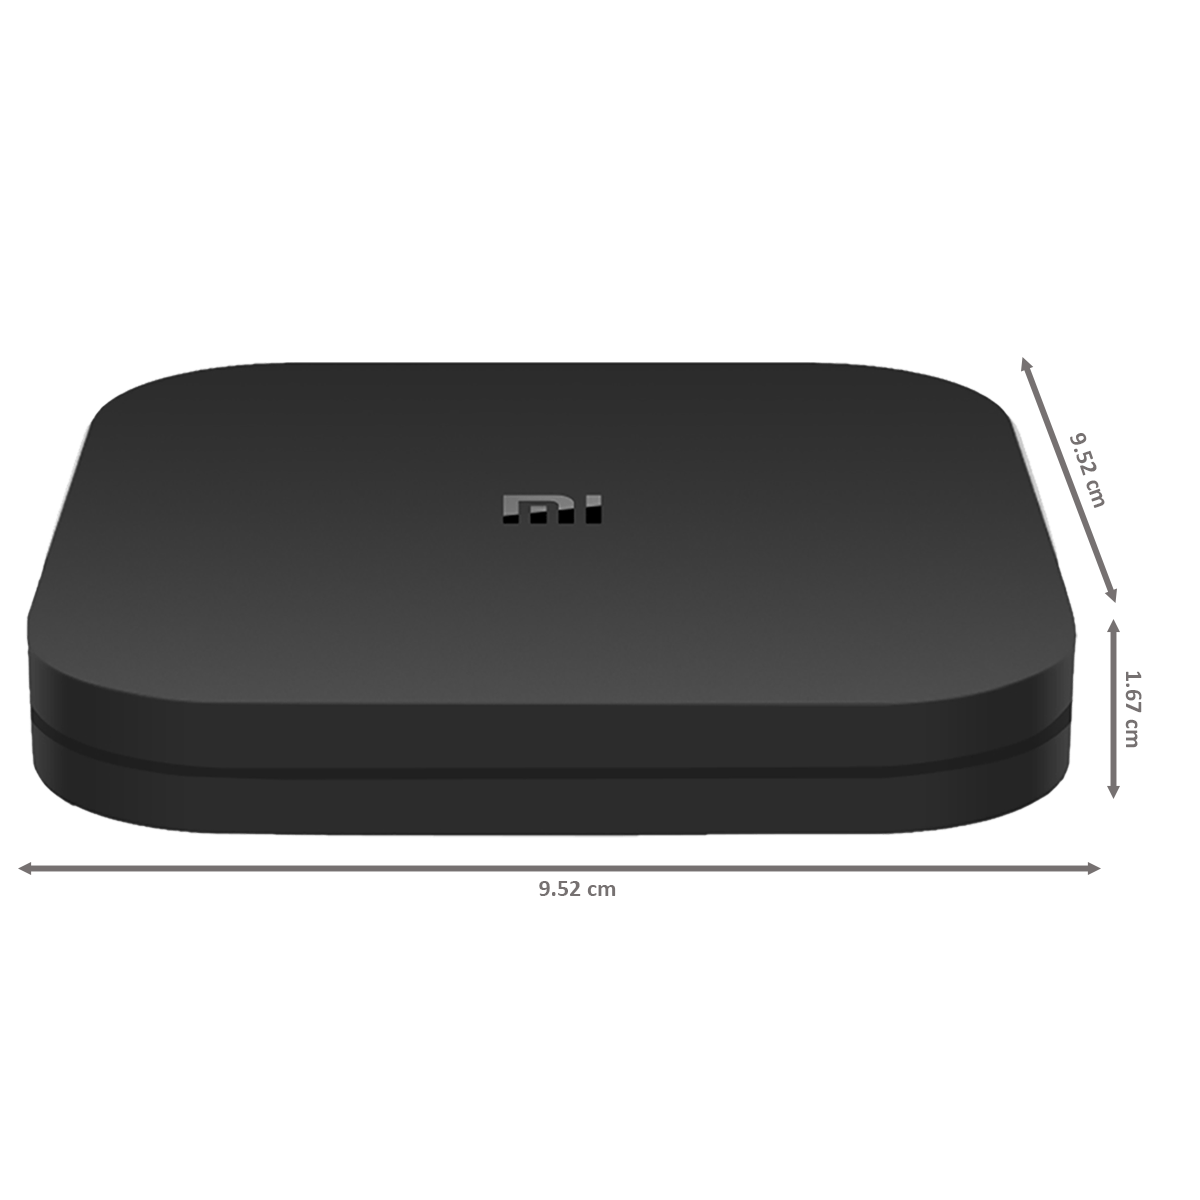 Mi 4K Smart TV Box with Google Assistant Voice Remote (Android TV 9.0, PFJ4096IN, Black)_2